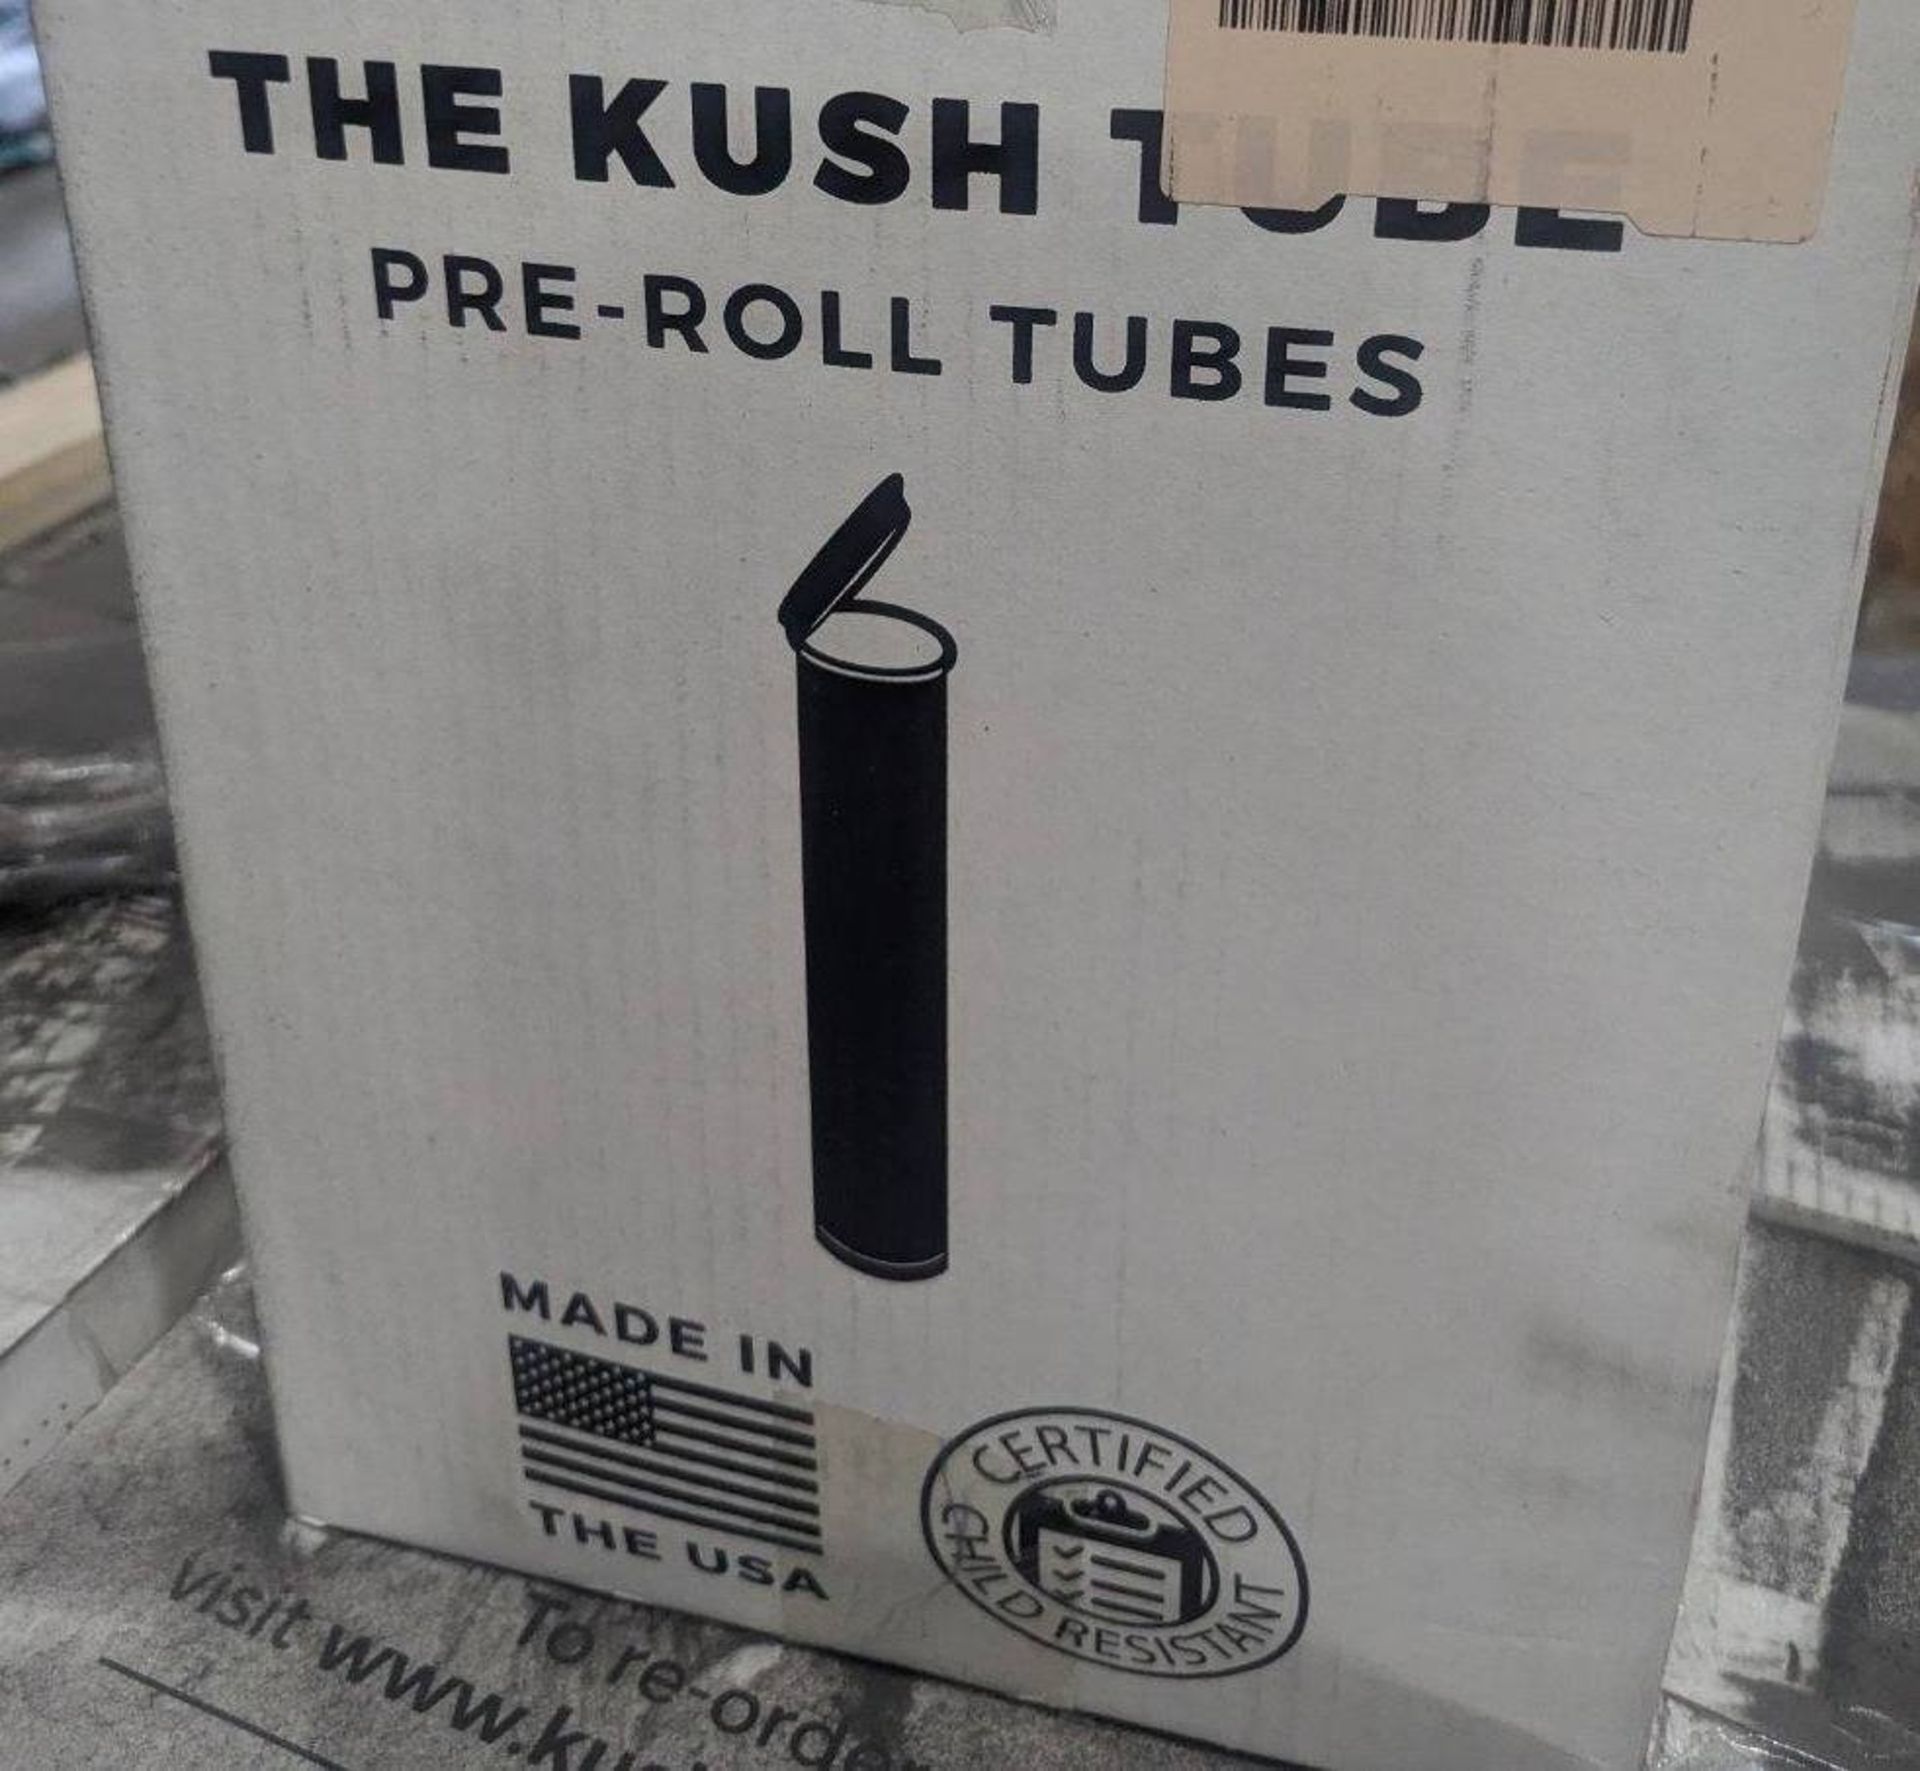 Lot of 26,000 Unused "The Kush Tube" 90 mm Snap Cap Joint Tubes. SKU 100760-000000. Color: Clear - Image 2 of 5